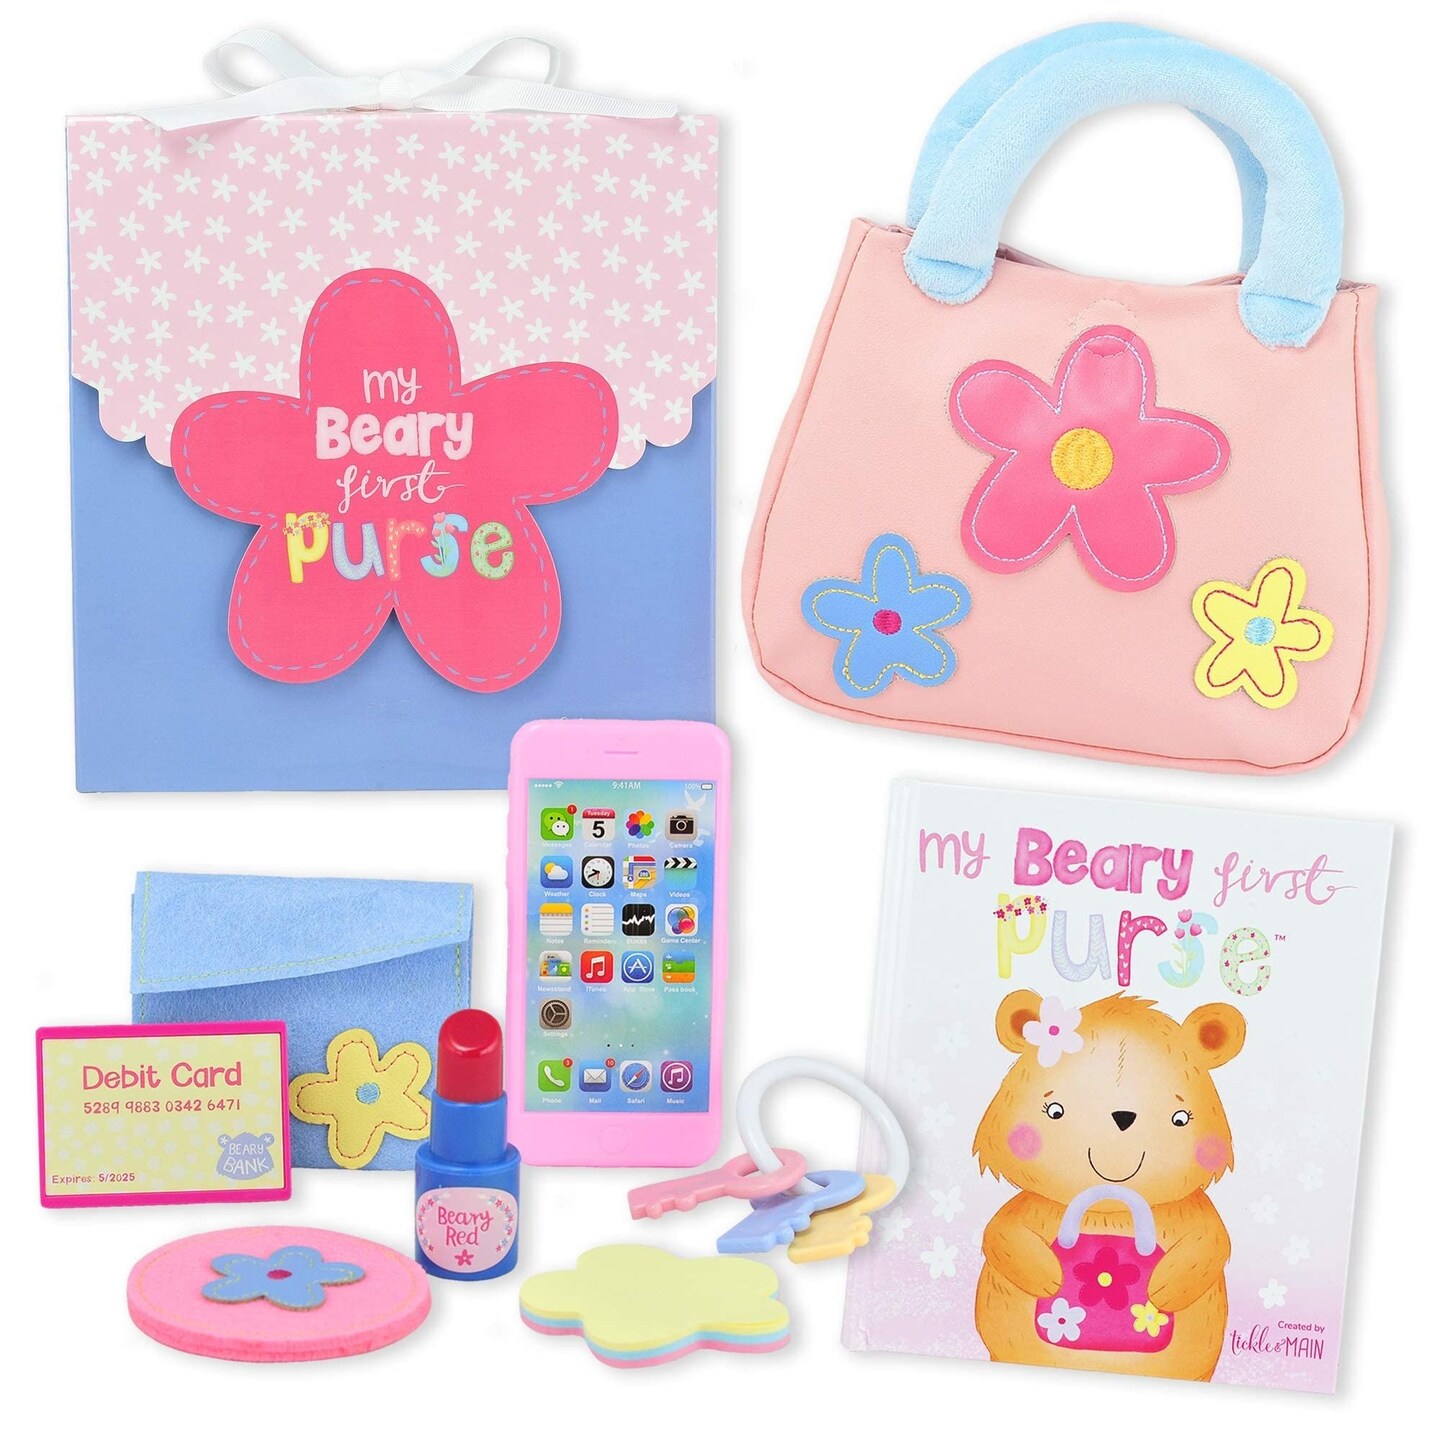 Tickle &#x26; Main My Beary First Purse, 9-Piece Gift Set Includes Purse, Storybook, and Accessories for Toddlers Ages 1-4 Years Old